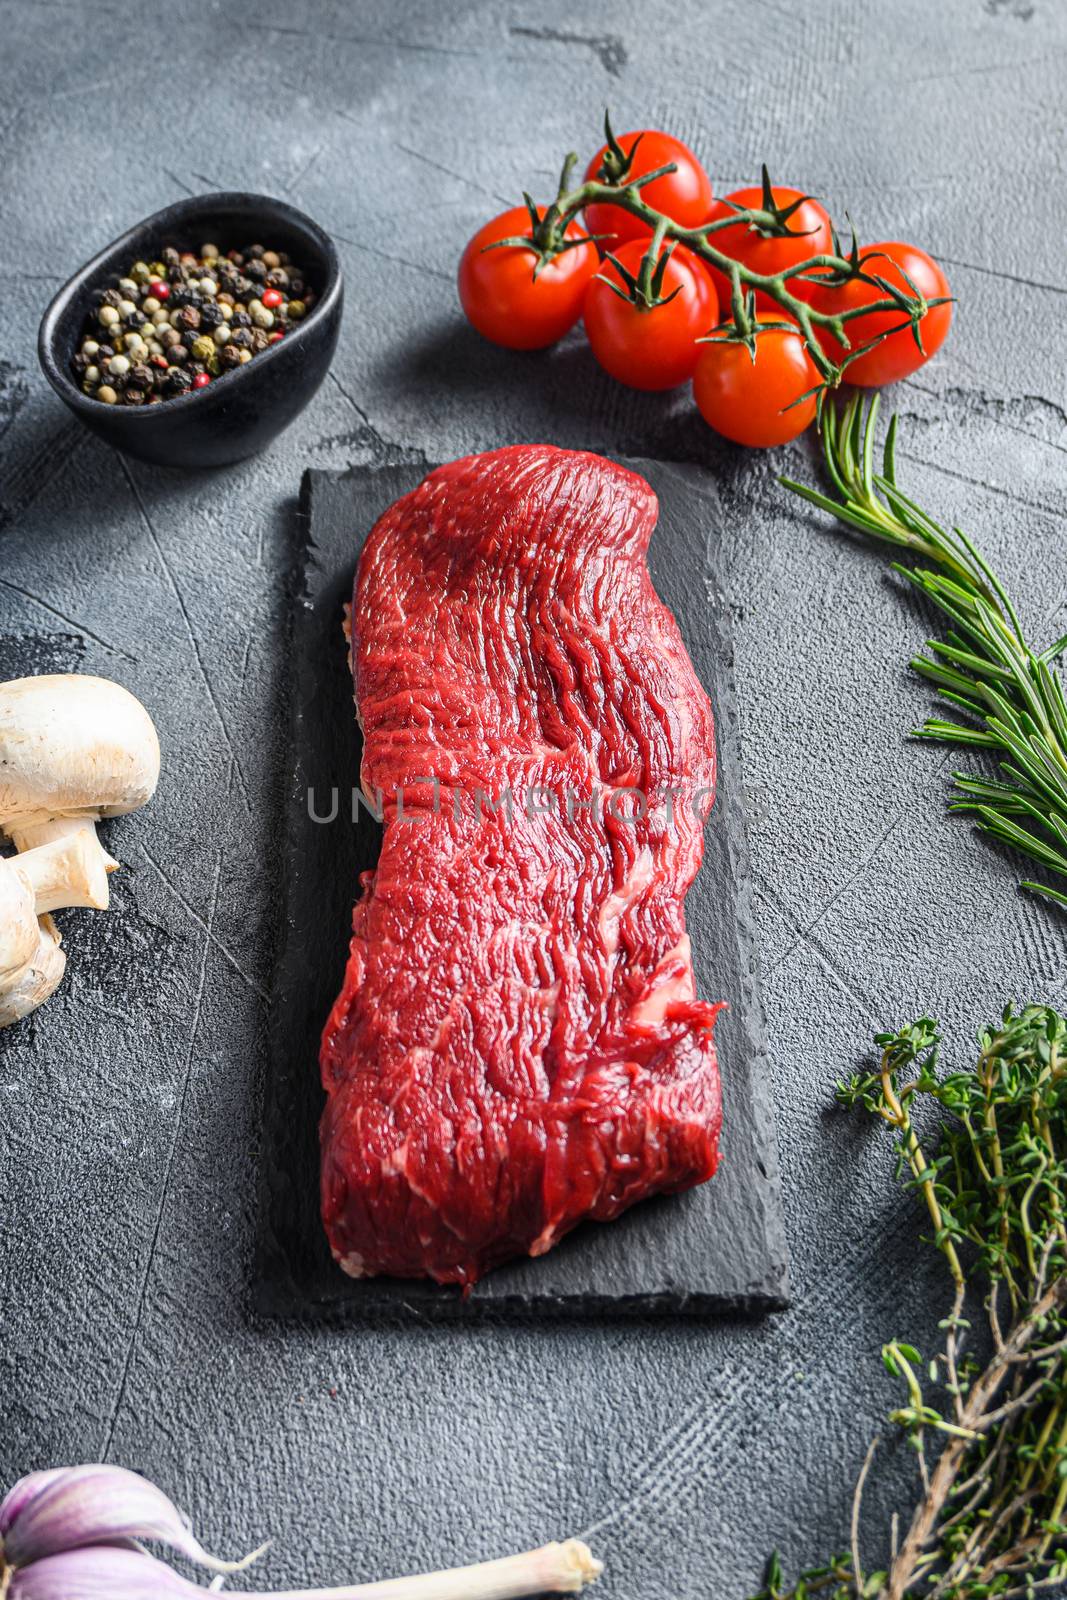 Organic Tri-tip, triangle roast marbled beef on black plate , marbled beef with herbs tomatoes peppercorns over grey stone surface background side view vertical.